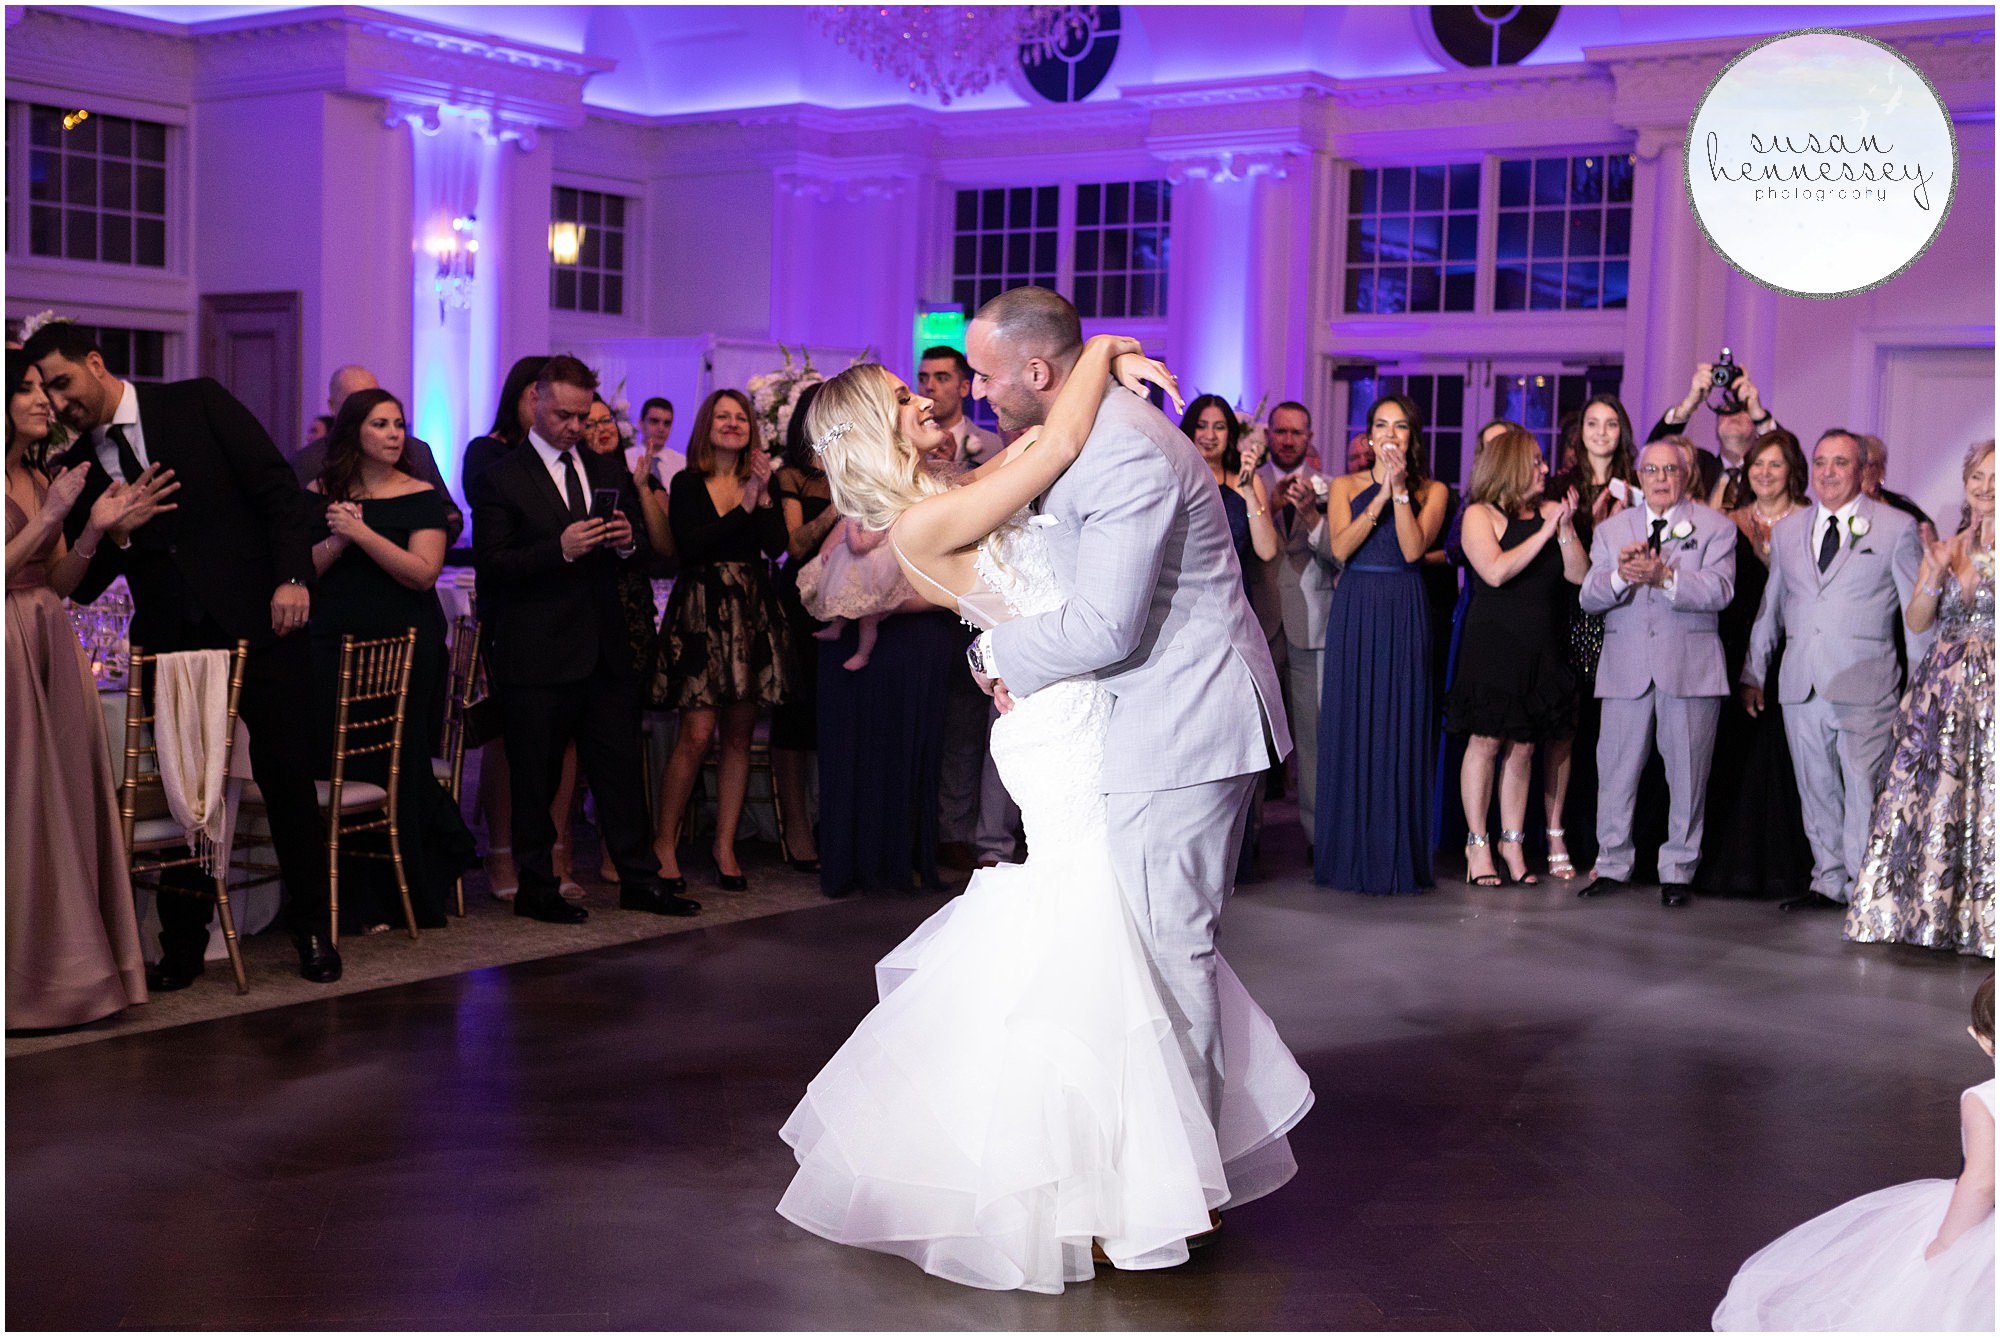 First dance for bride and groom at their Park Chateau wedding